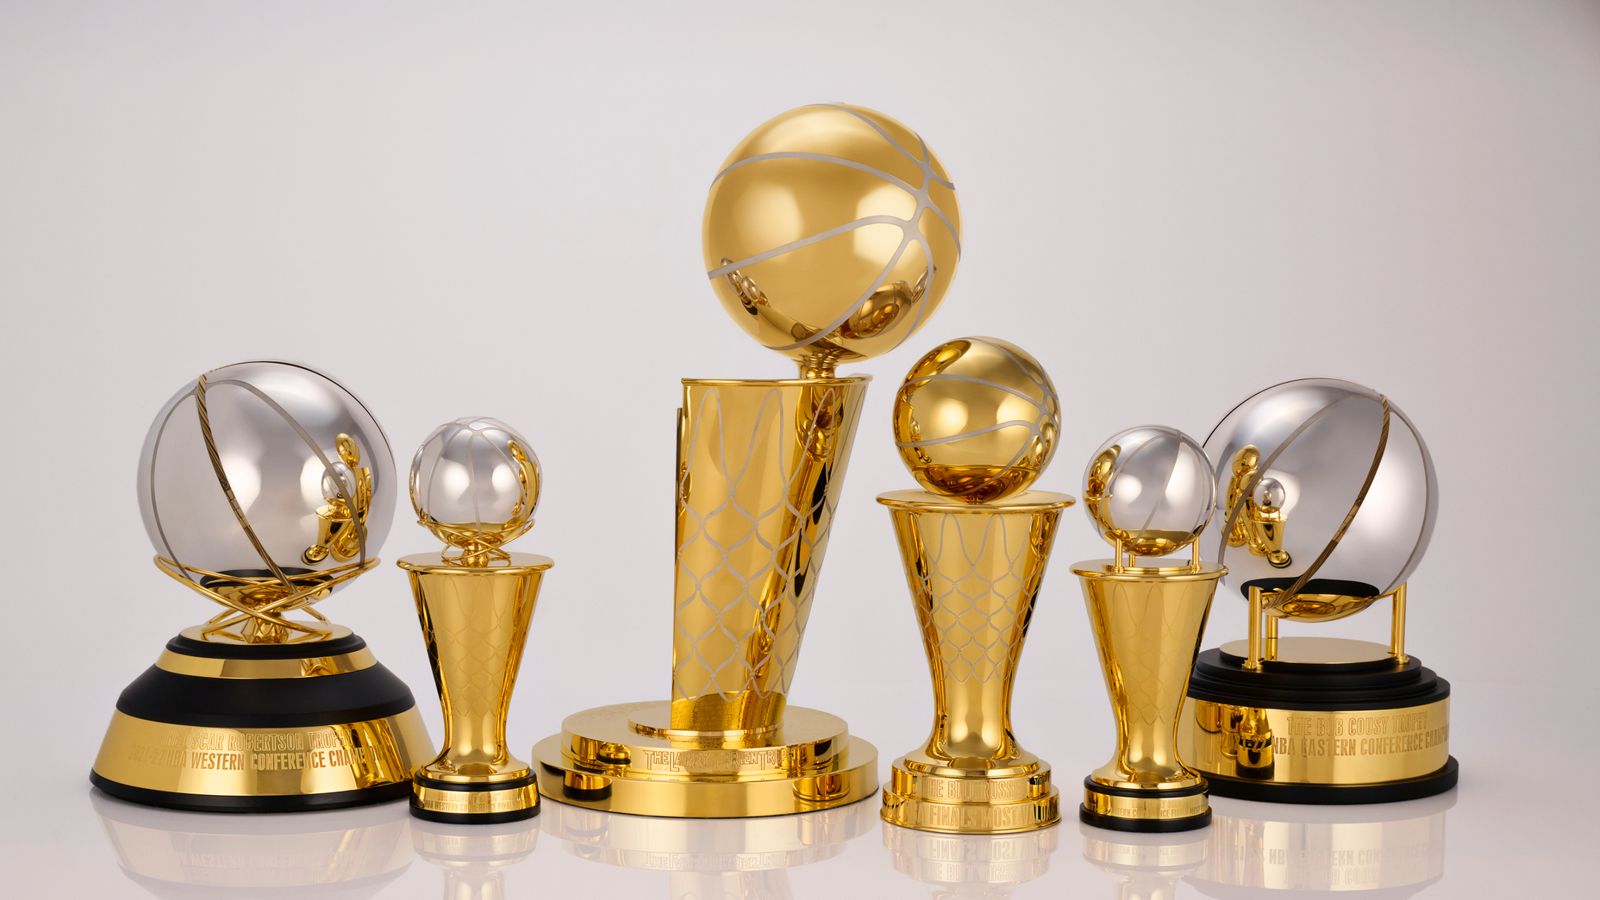 Tiffany & Co. Redesigned the Larry O'Brien NBA Finals Trophy – Robb Report